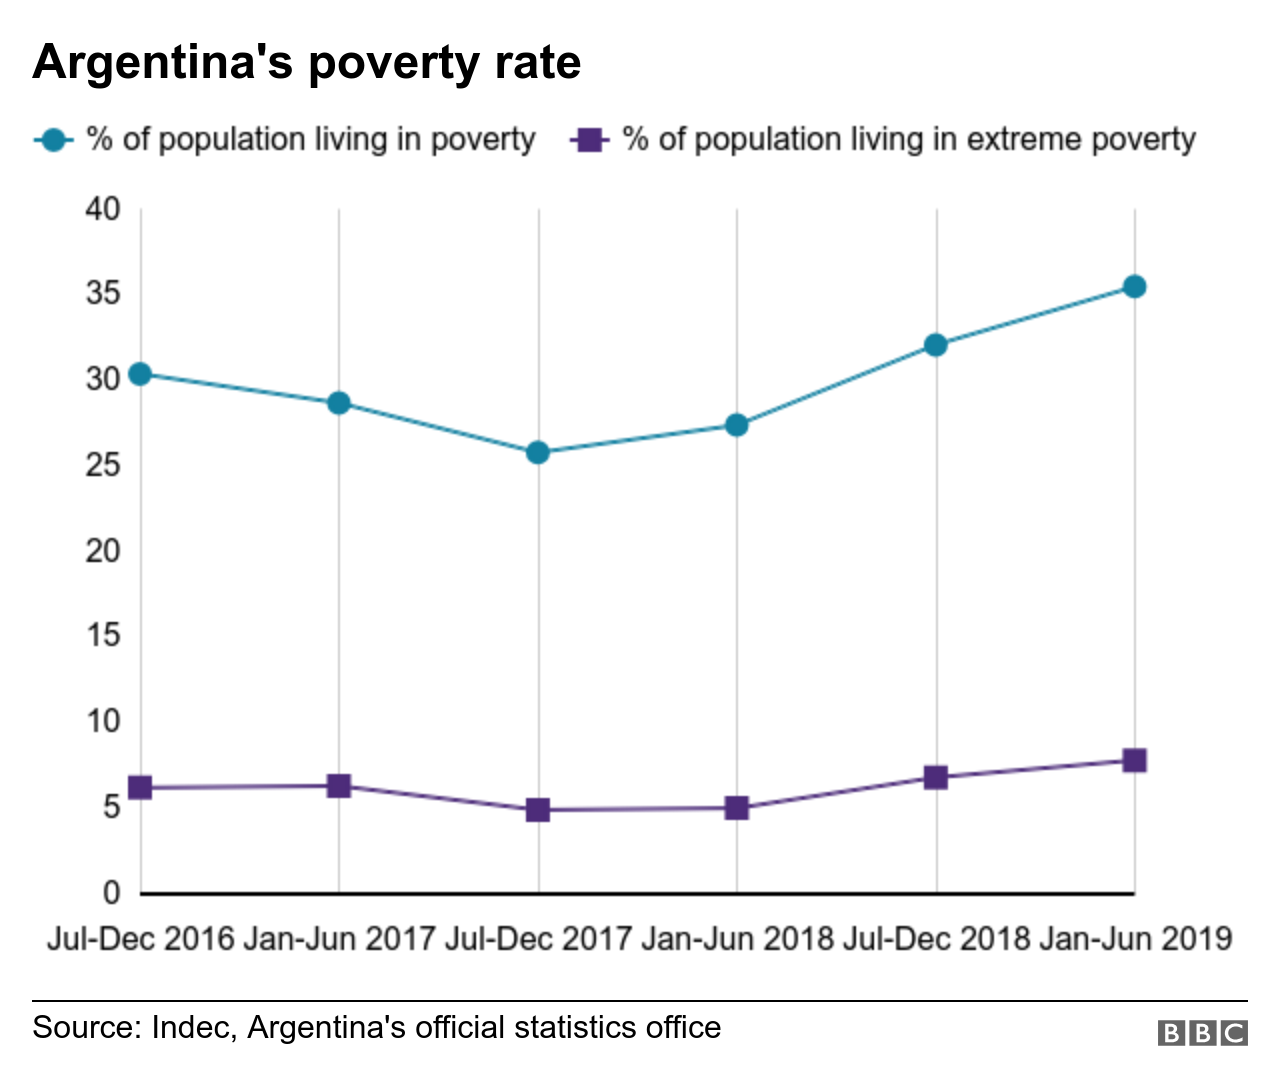 Poverty figures for Argentina, showing an uptick in early 2019 to